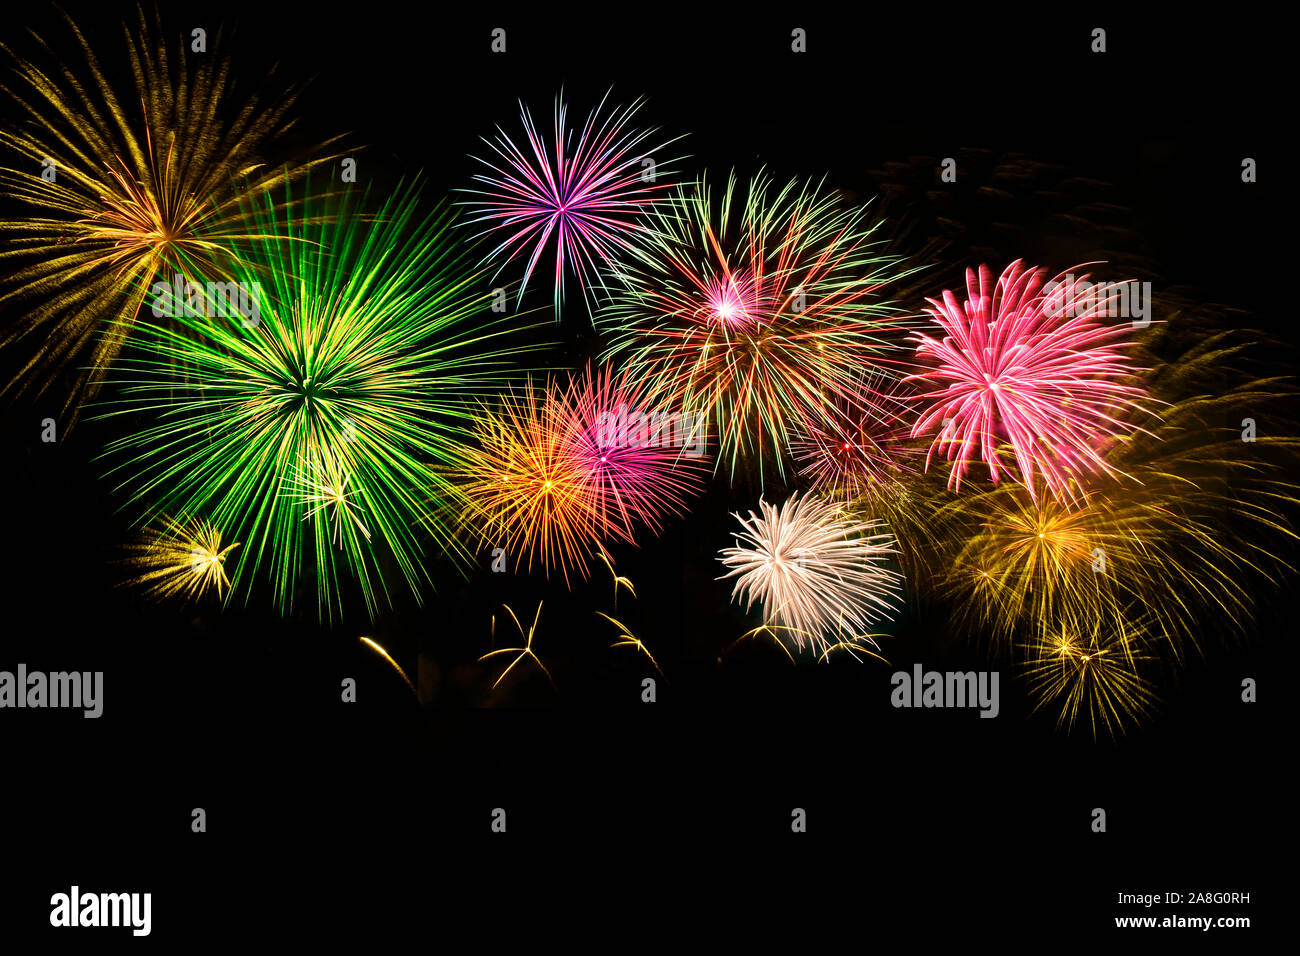 Colorful fireworks on midnight sky background. Stock Photo